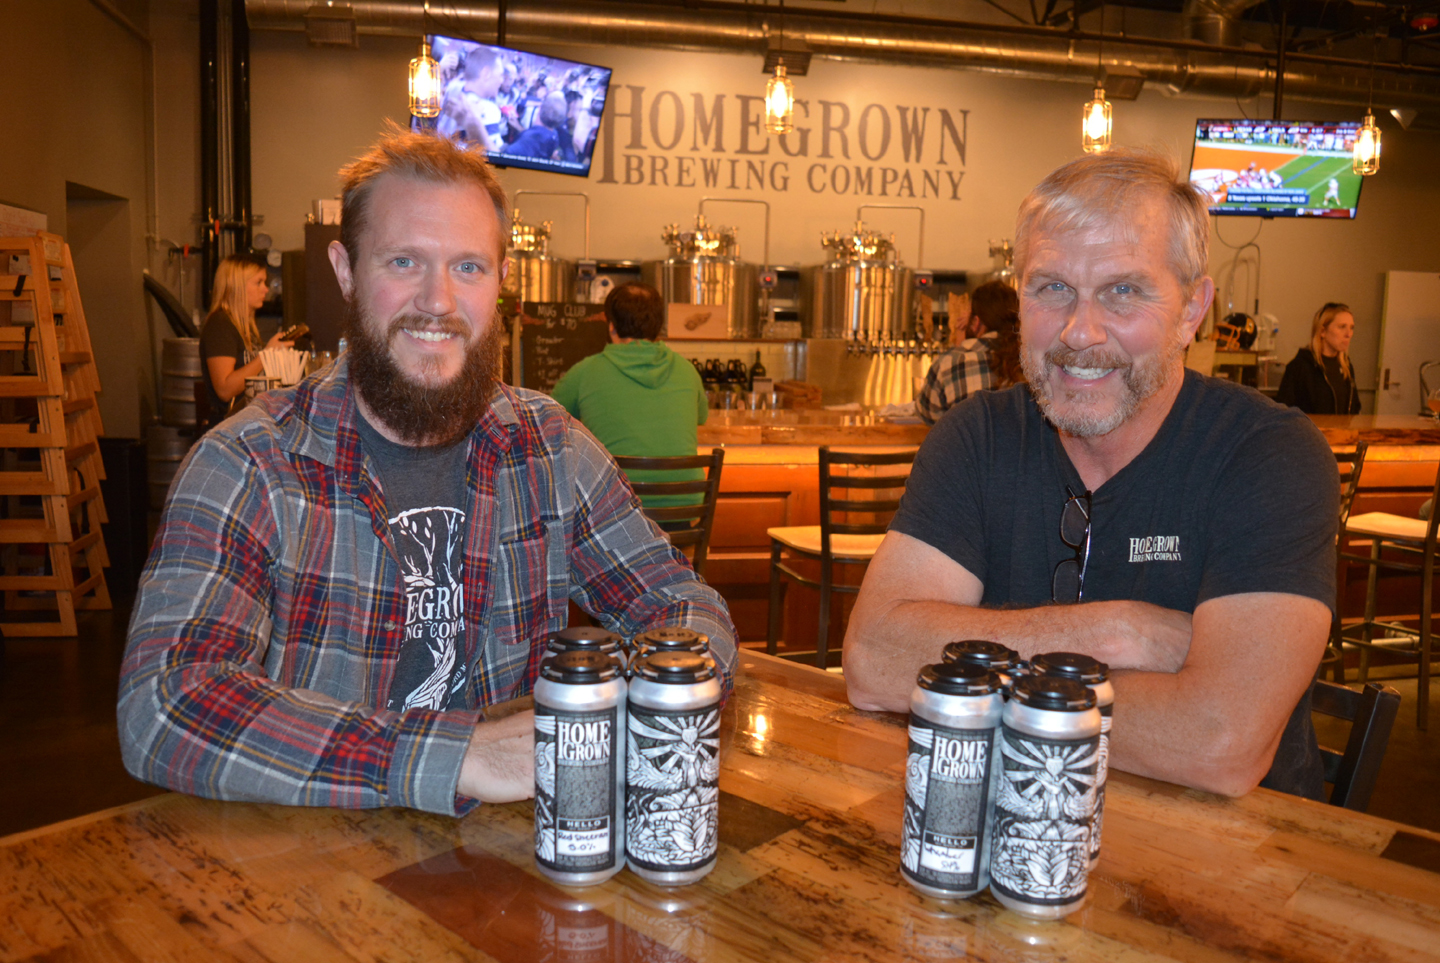 John Powers (right), co-owner of HomeGrown Brewing Company, and Head Brewer Joe Powers are excited to offer seven of their beers in four-packs of 16-ounce cans. Photo by C.J. Carnacchio.